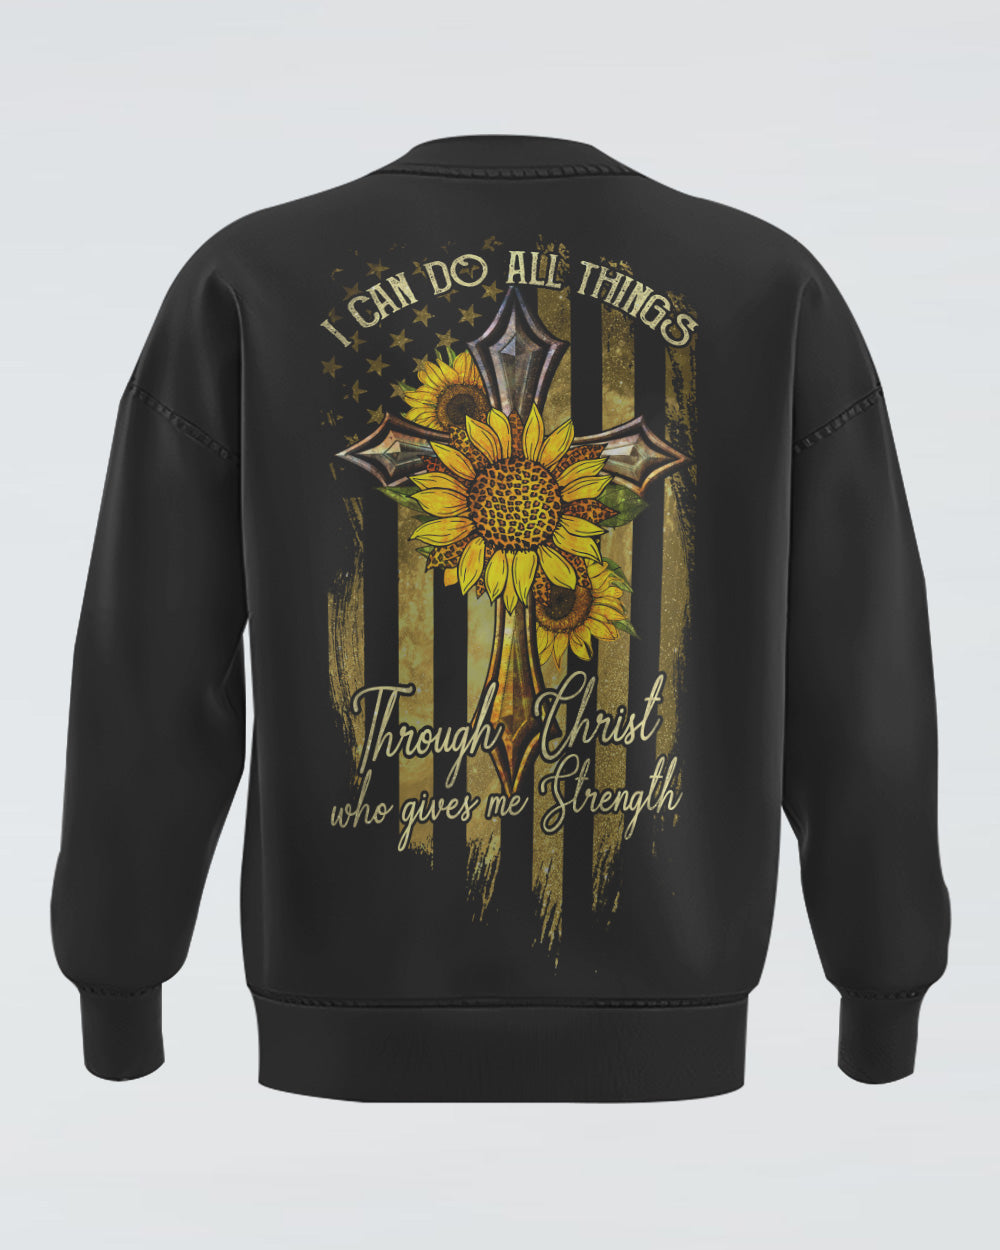 I Can Do All Things Through Christ Who Gives Me Strength Sunflower Flag Cross Women's Christian Sweatshirt